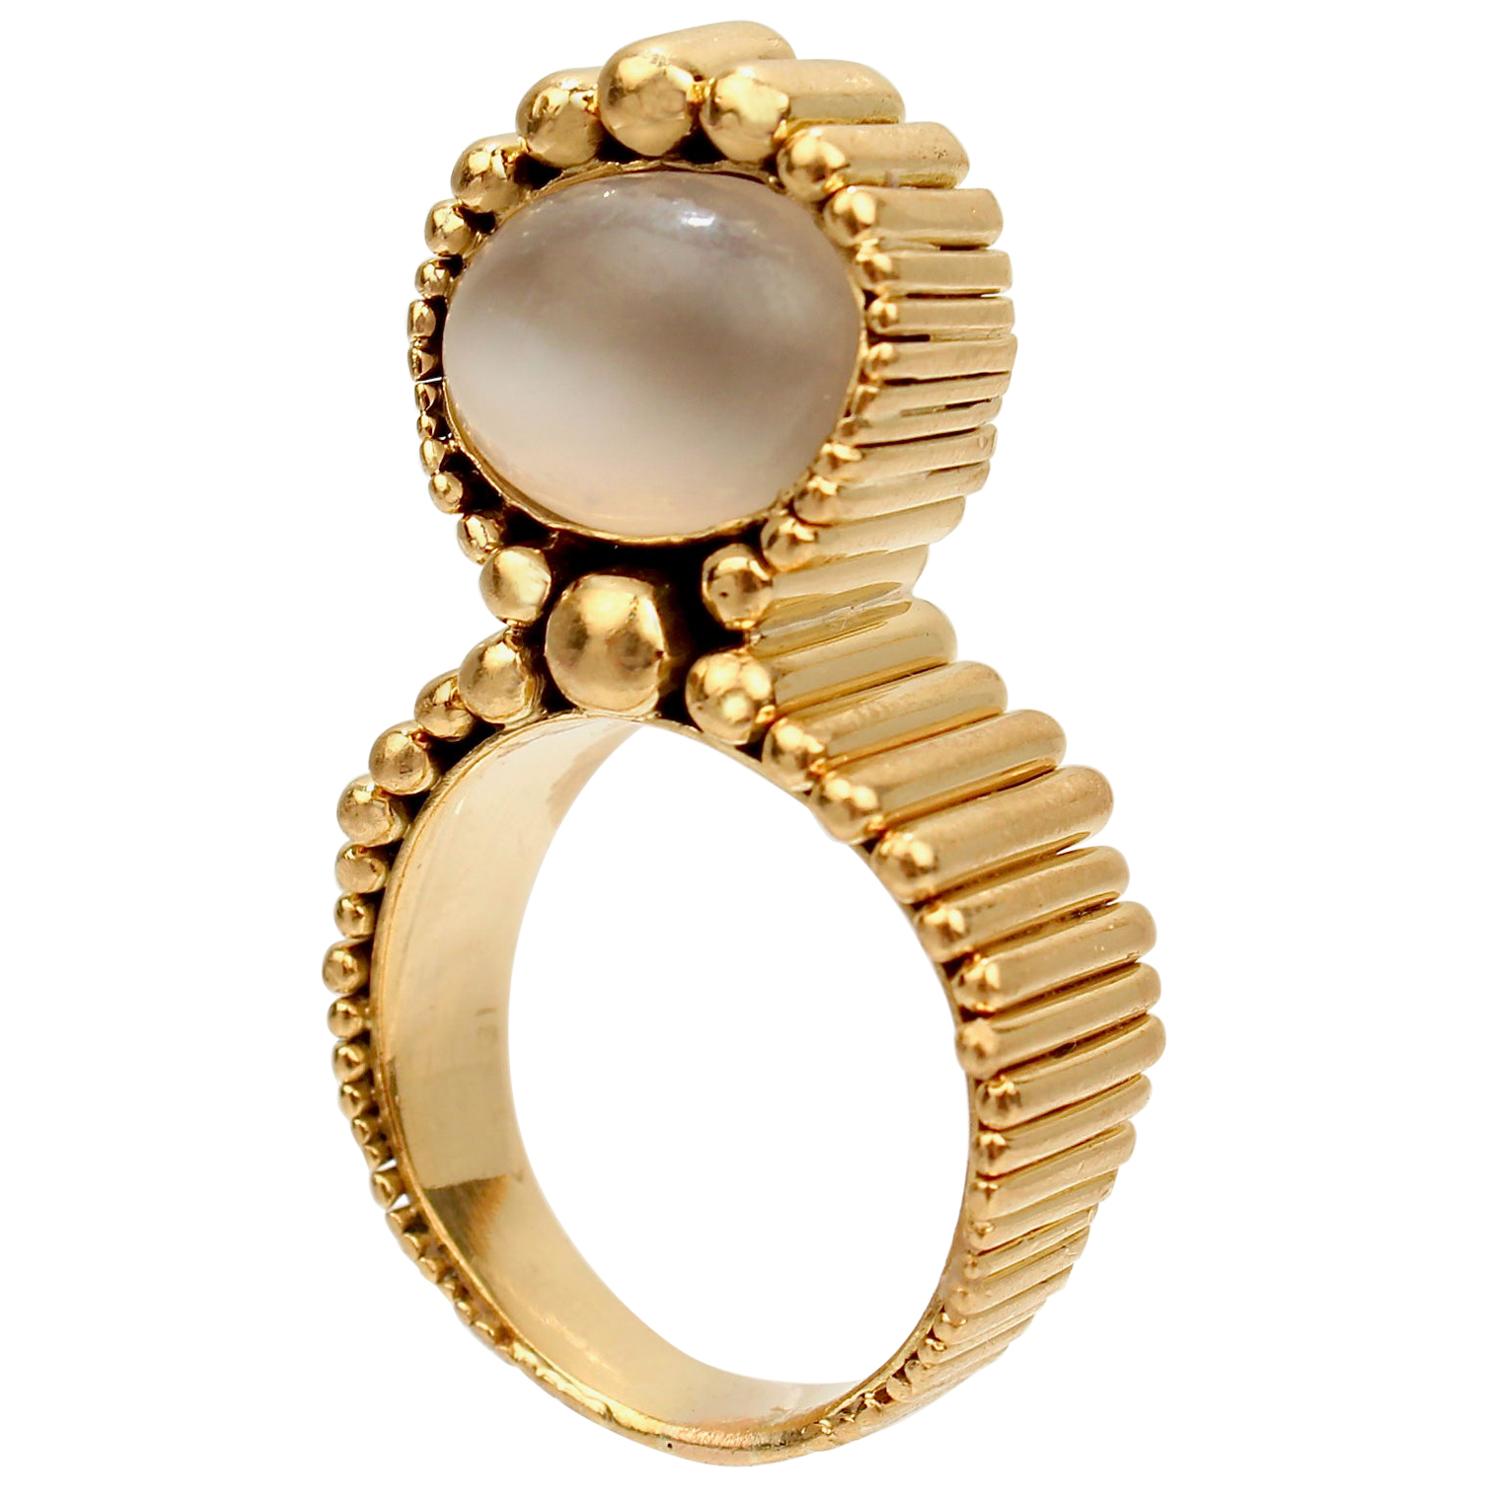 Signed Space Age 18 Karat Gold and Moonstone Cocktail Ring by F. J. Cooper